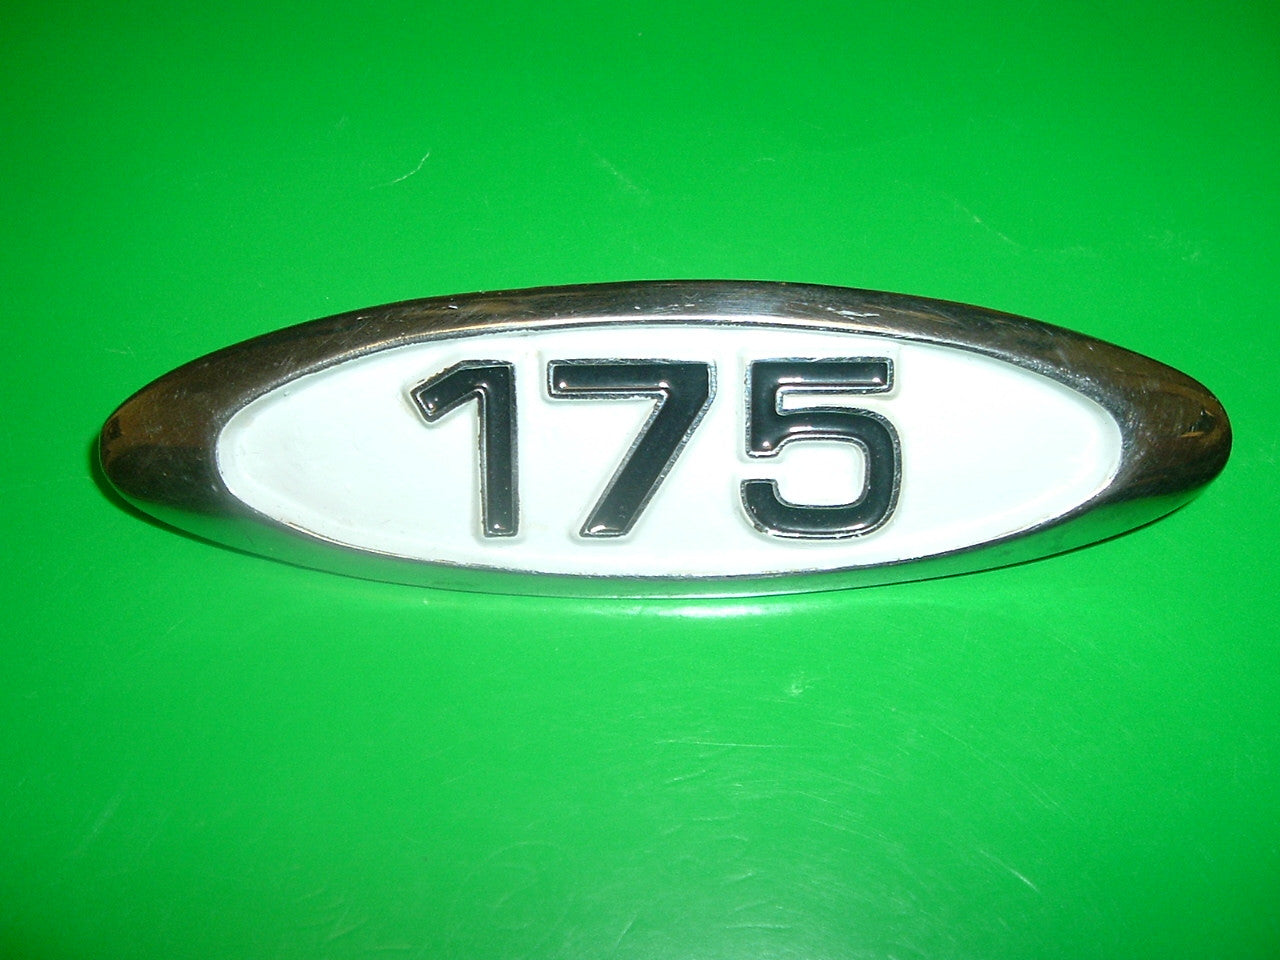 Sold by  Invoice  5/24/16Honda CB175 CL175 K4 1970 white Sidecover Badge